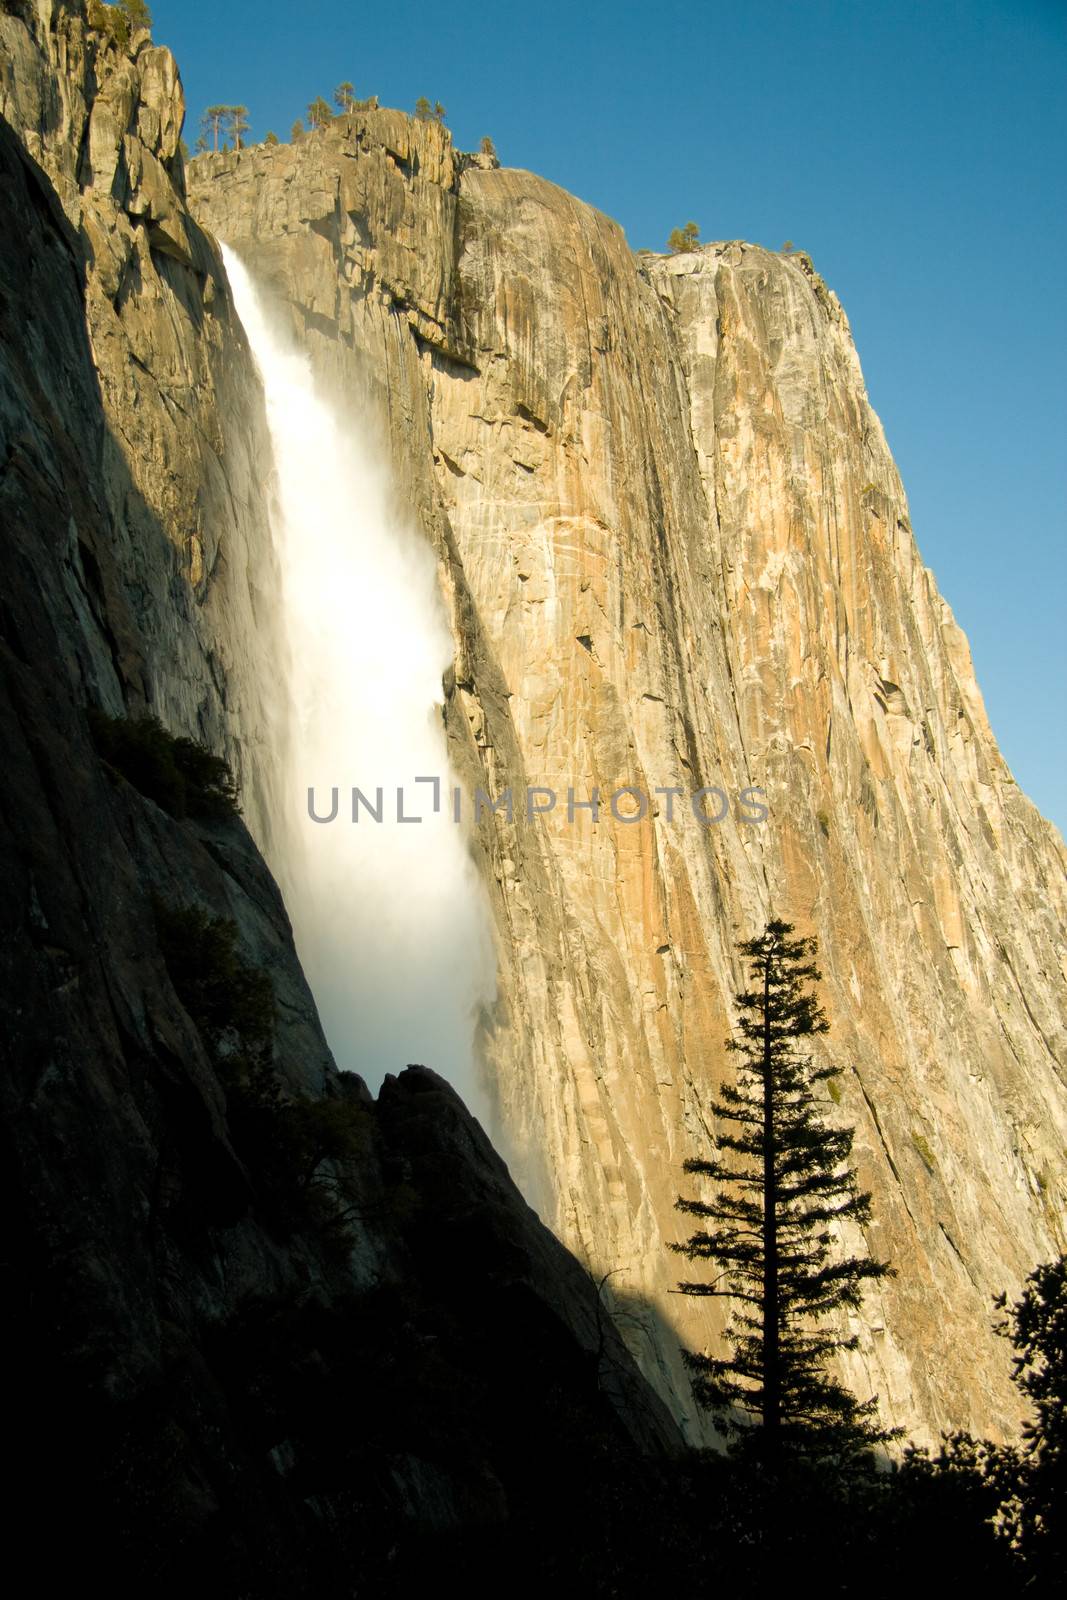 Water falling from rocks in a valley, Yosemite Falls, Yosemite Valley, Yosemite National Park, California, USA